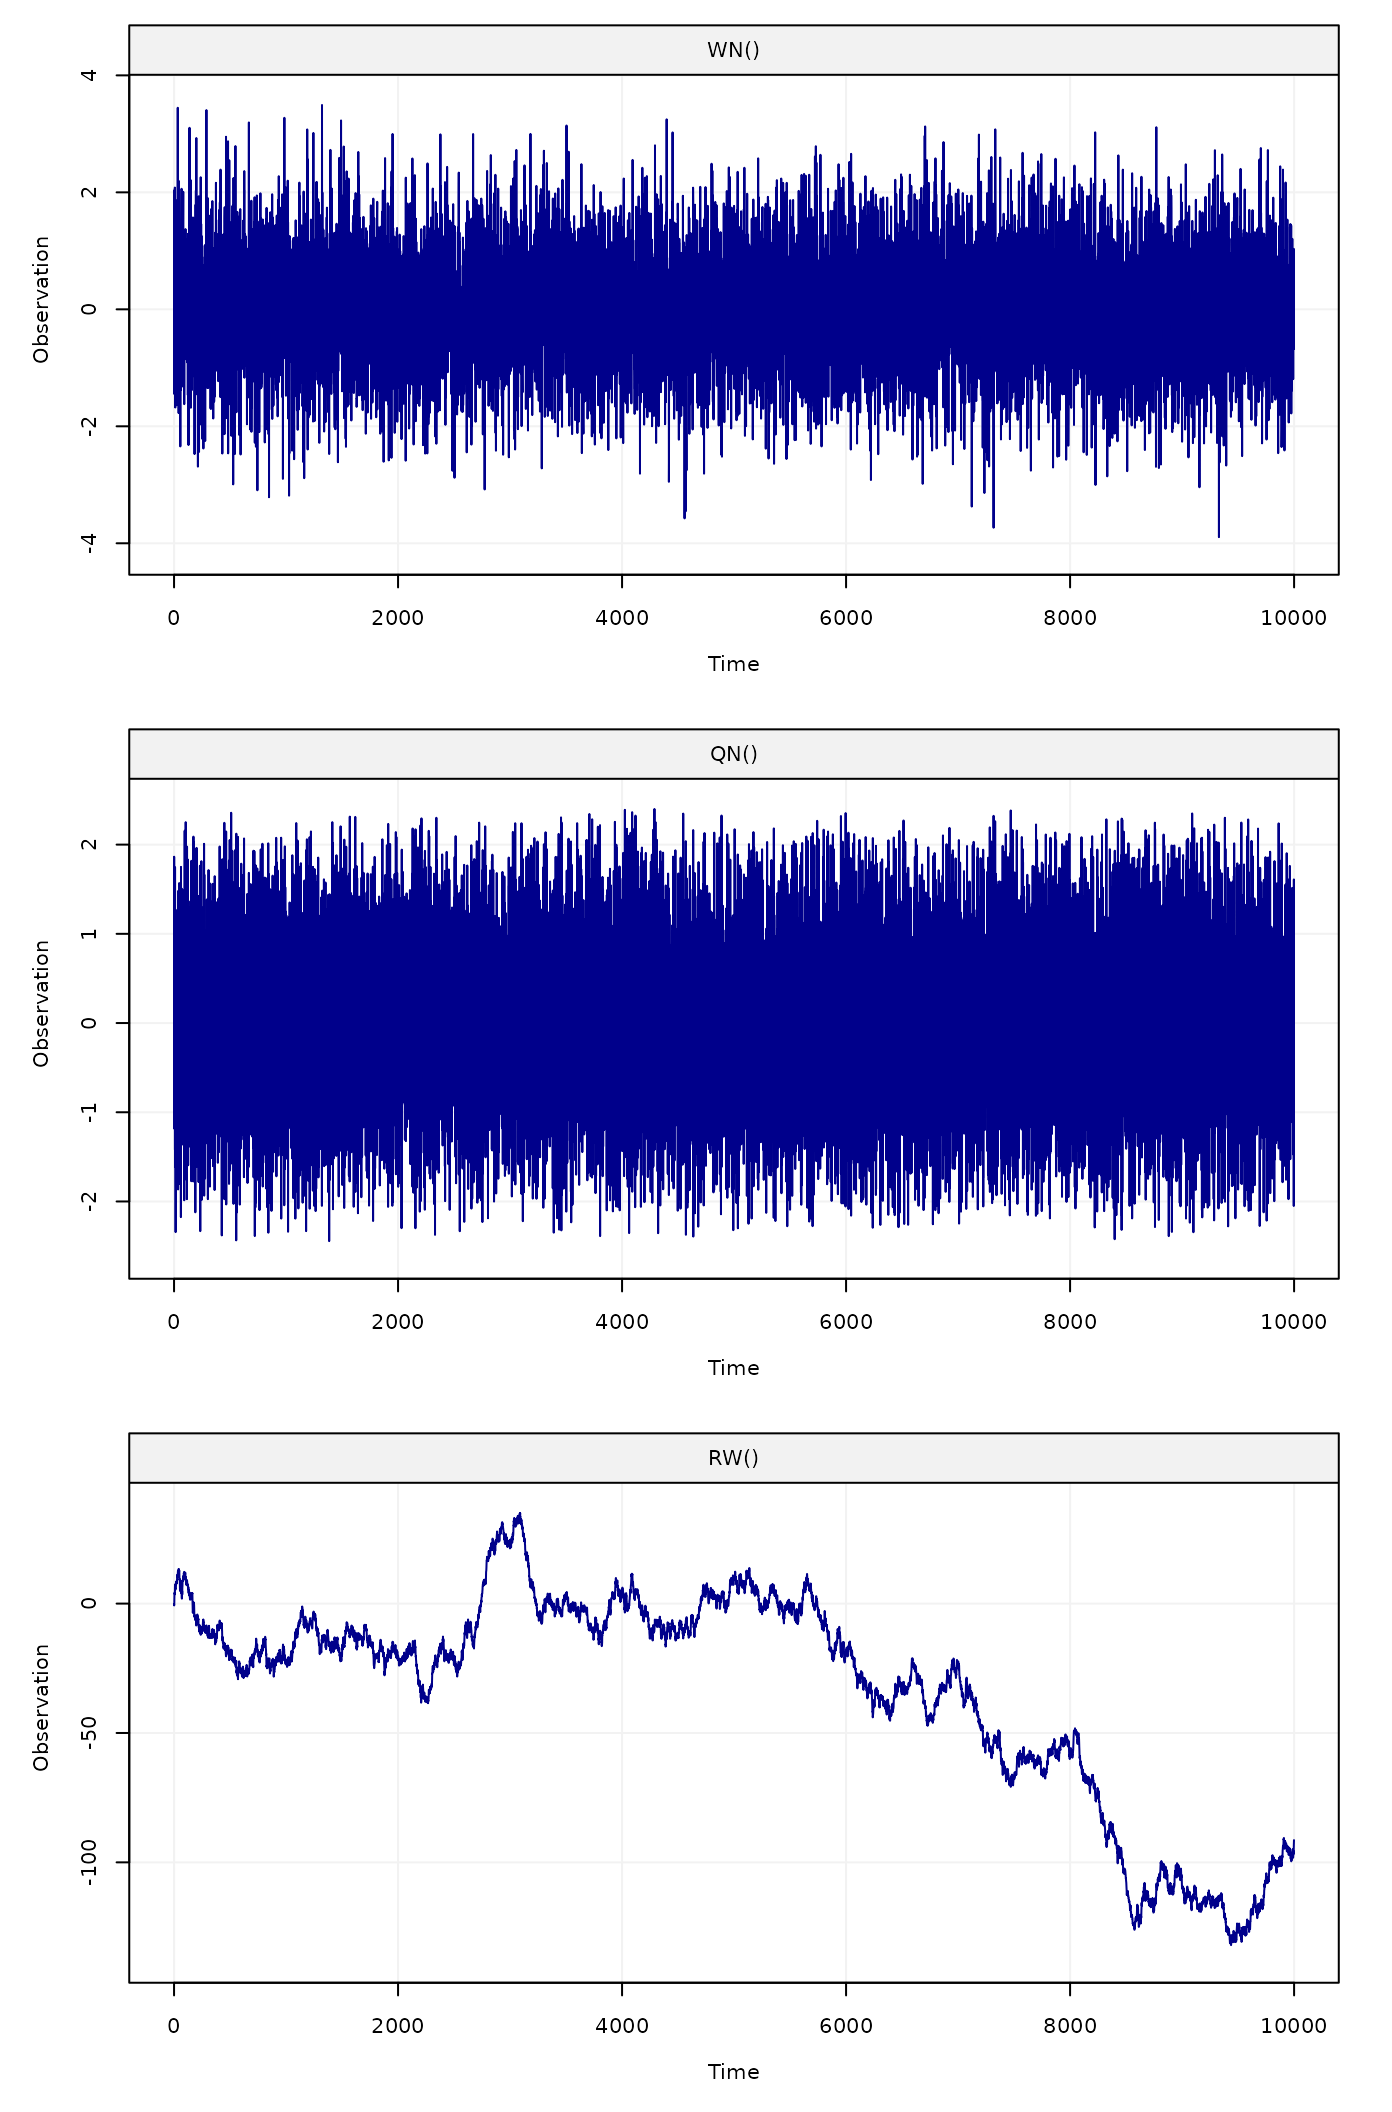 Figure 1: Simulated white noise process (top panel), quantiation noise (middle panel) and random walk process (bottom panel)